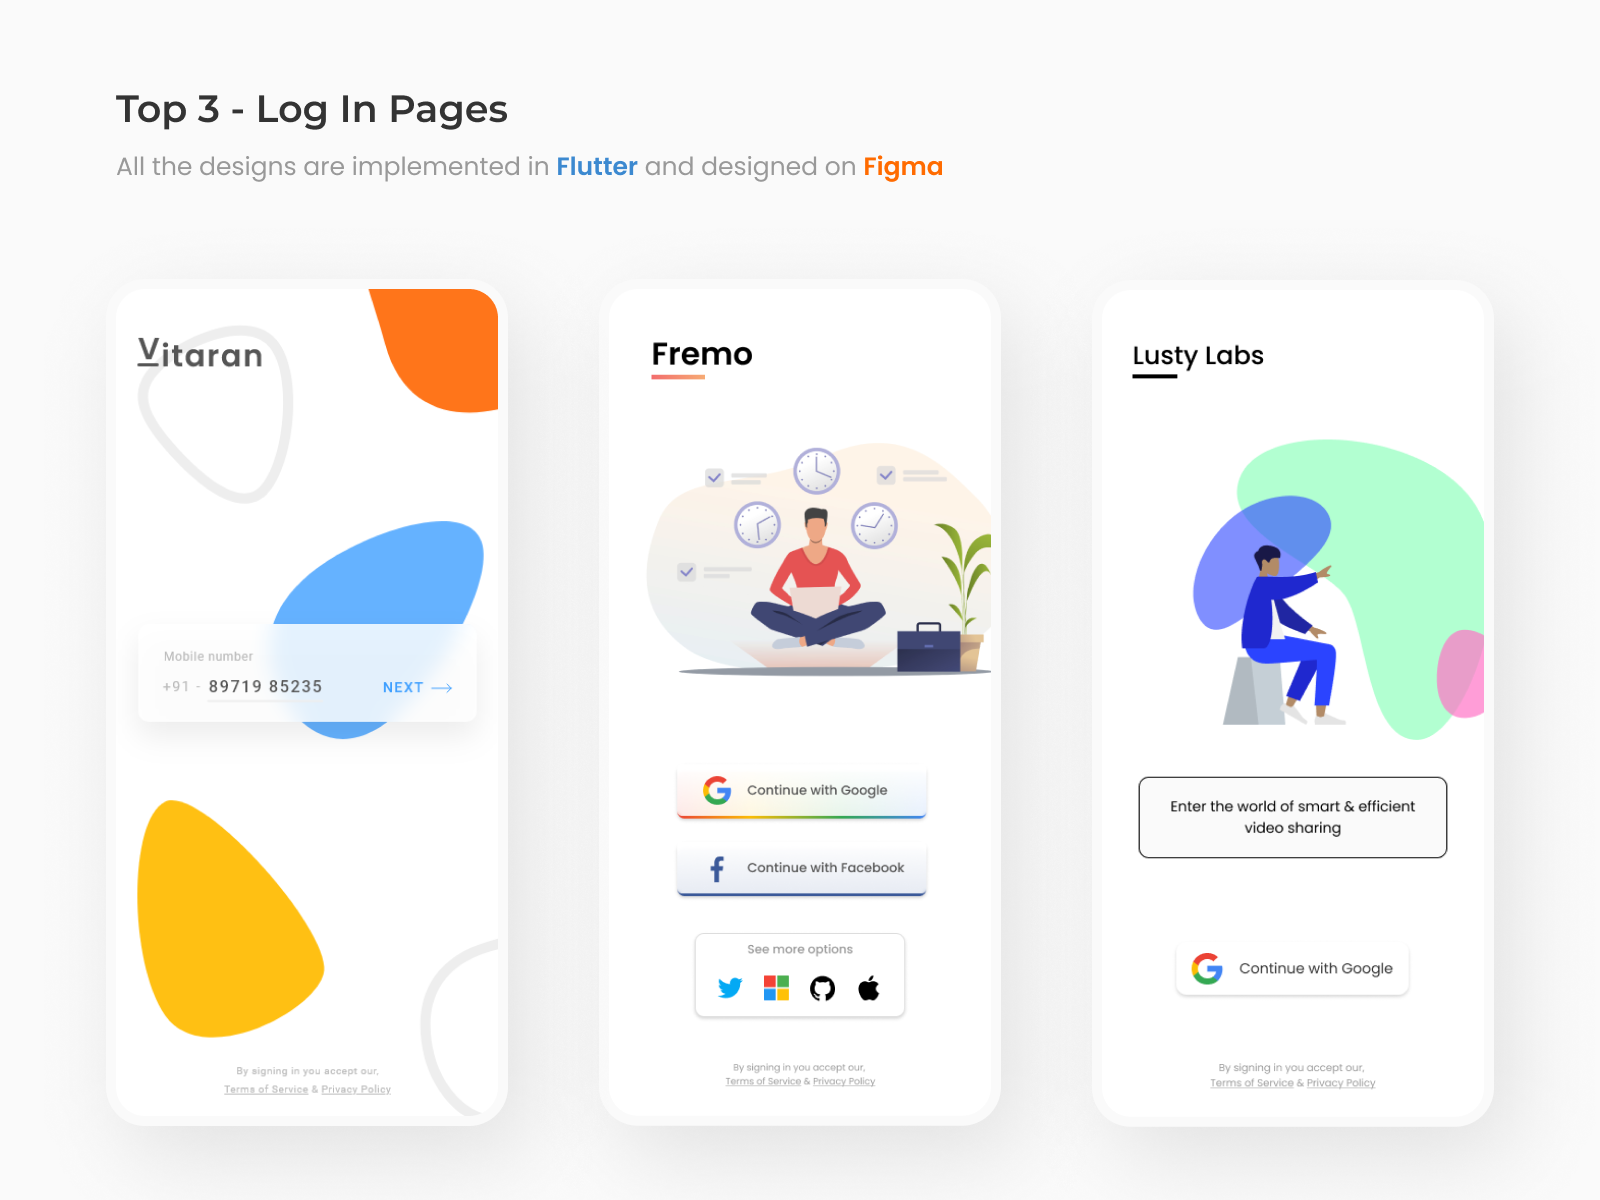 Top 3 - Log In Pages